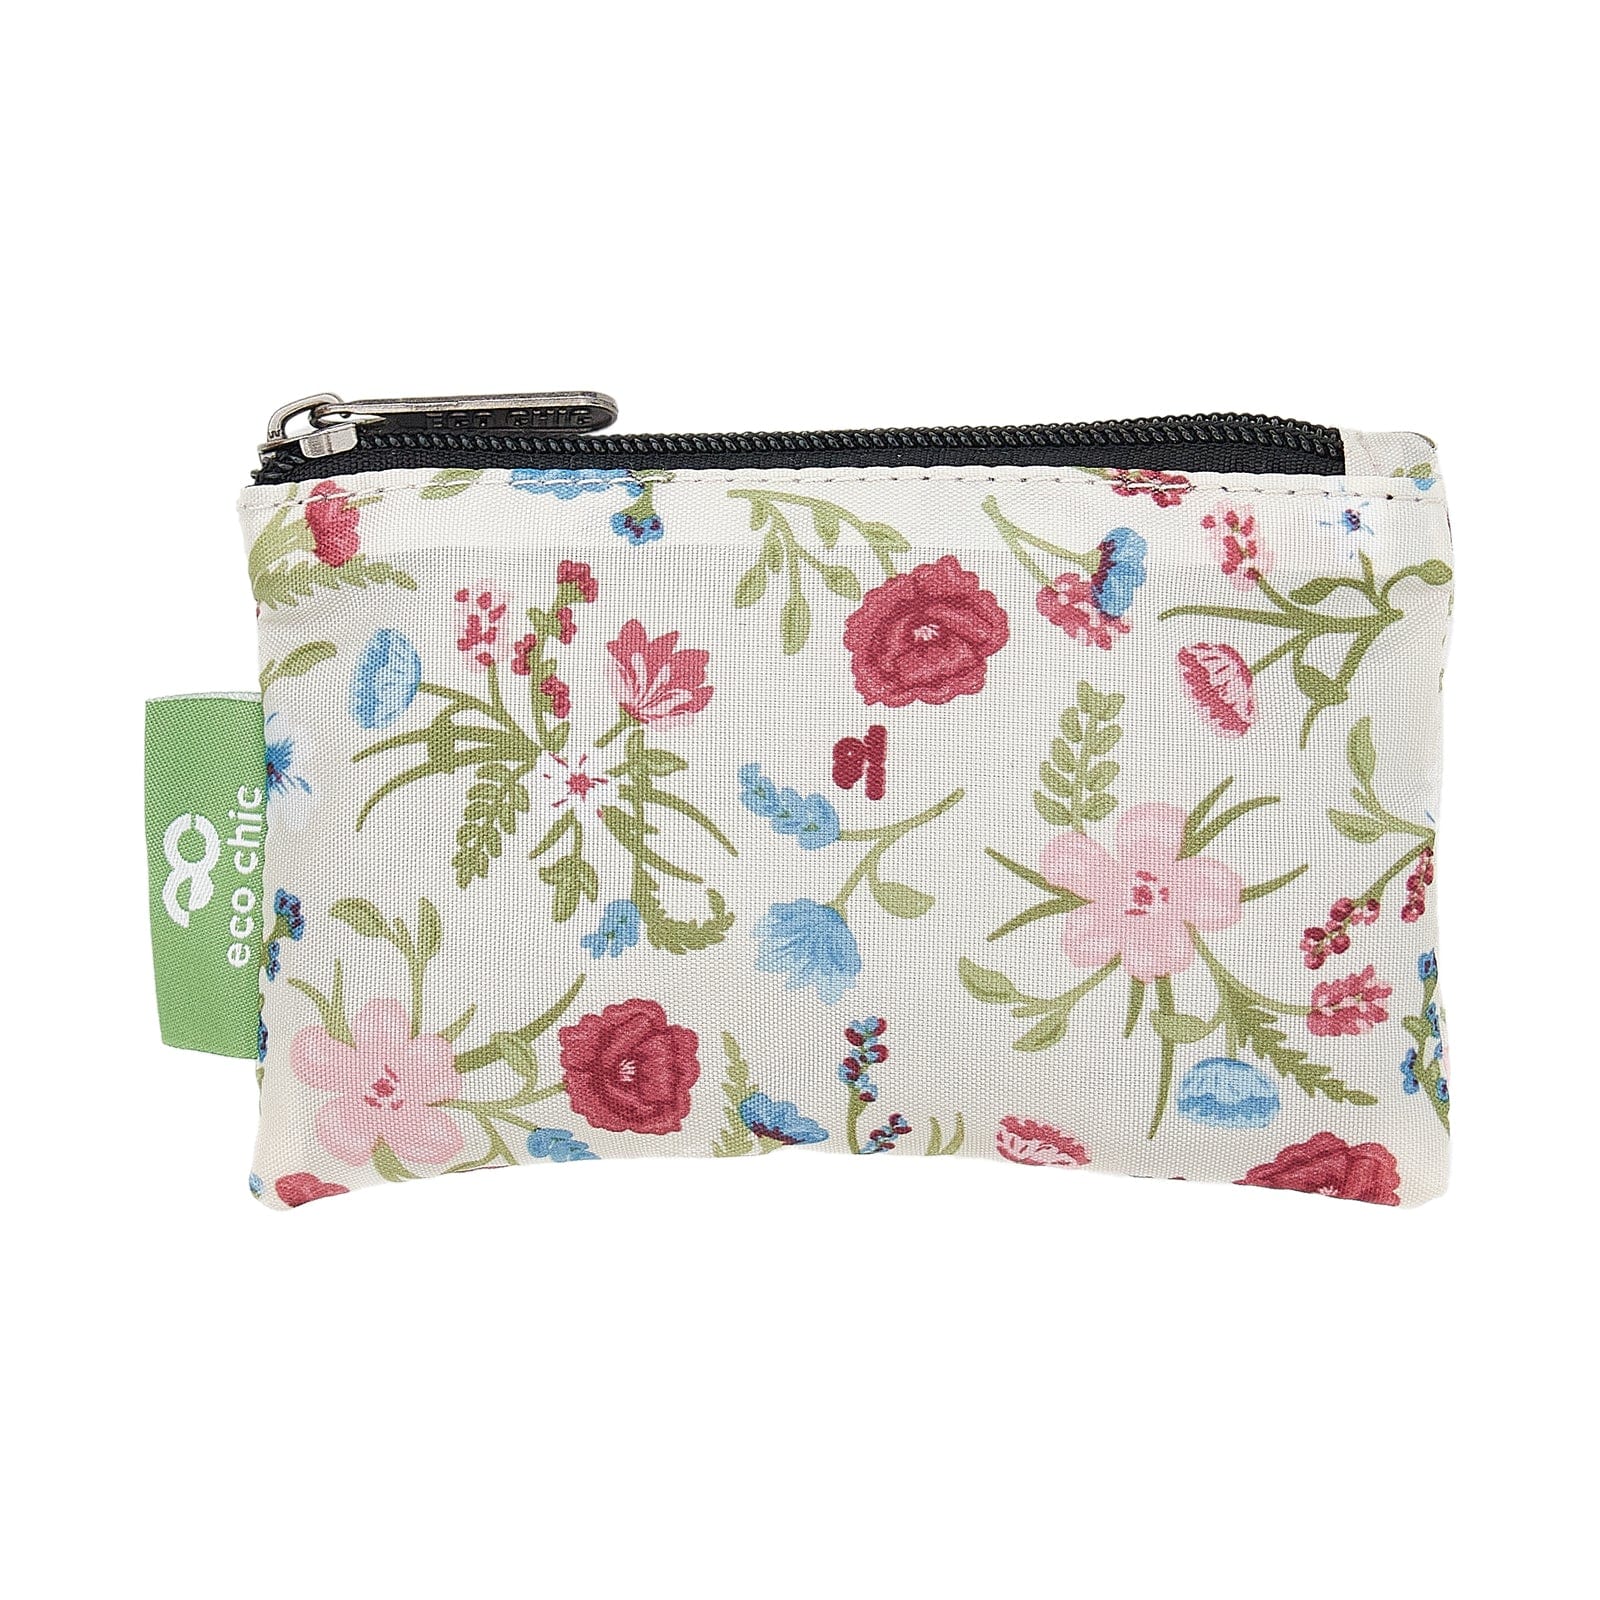 Eco Chic Retail Ltd Eco Chic Zip-Up Coin Purse Floral Beige